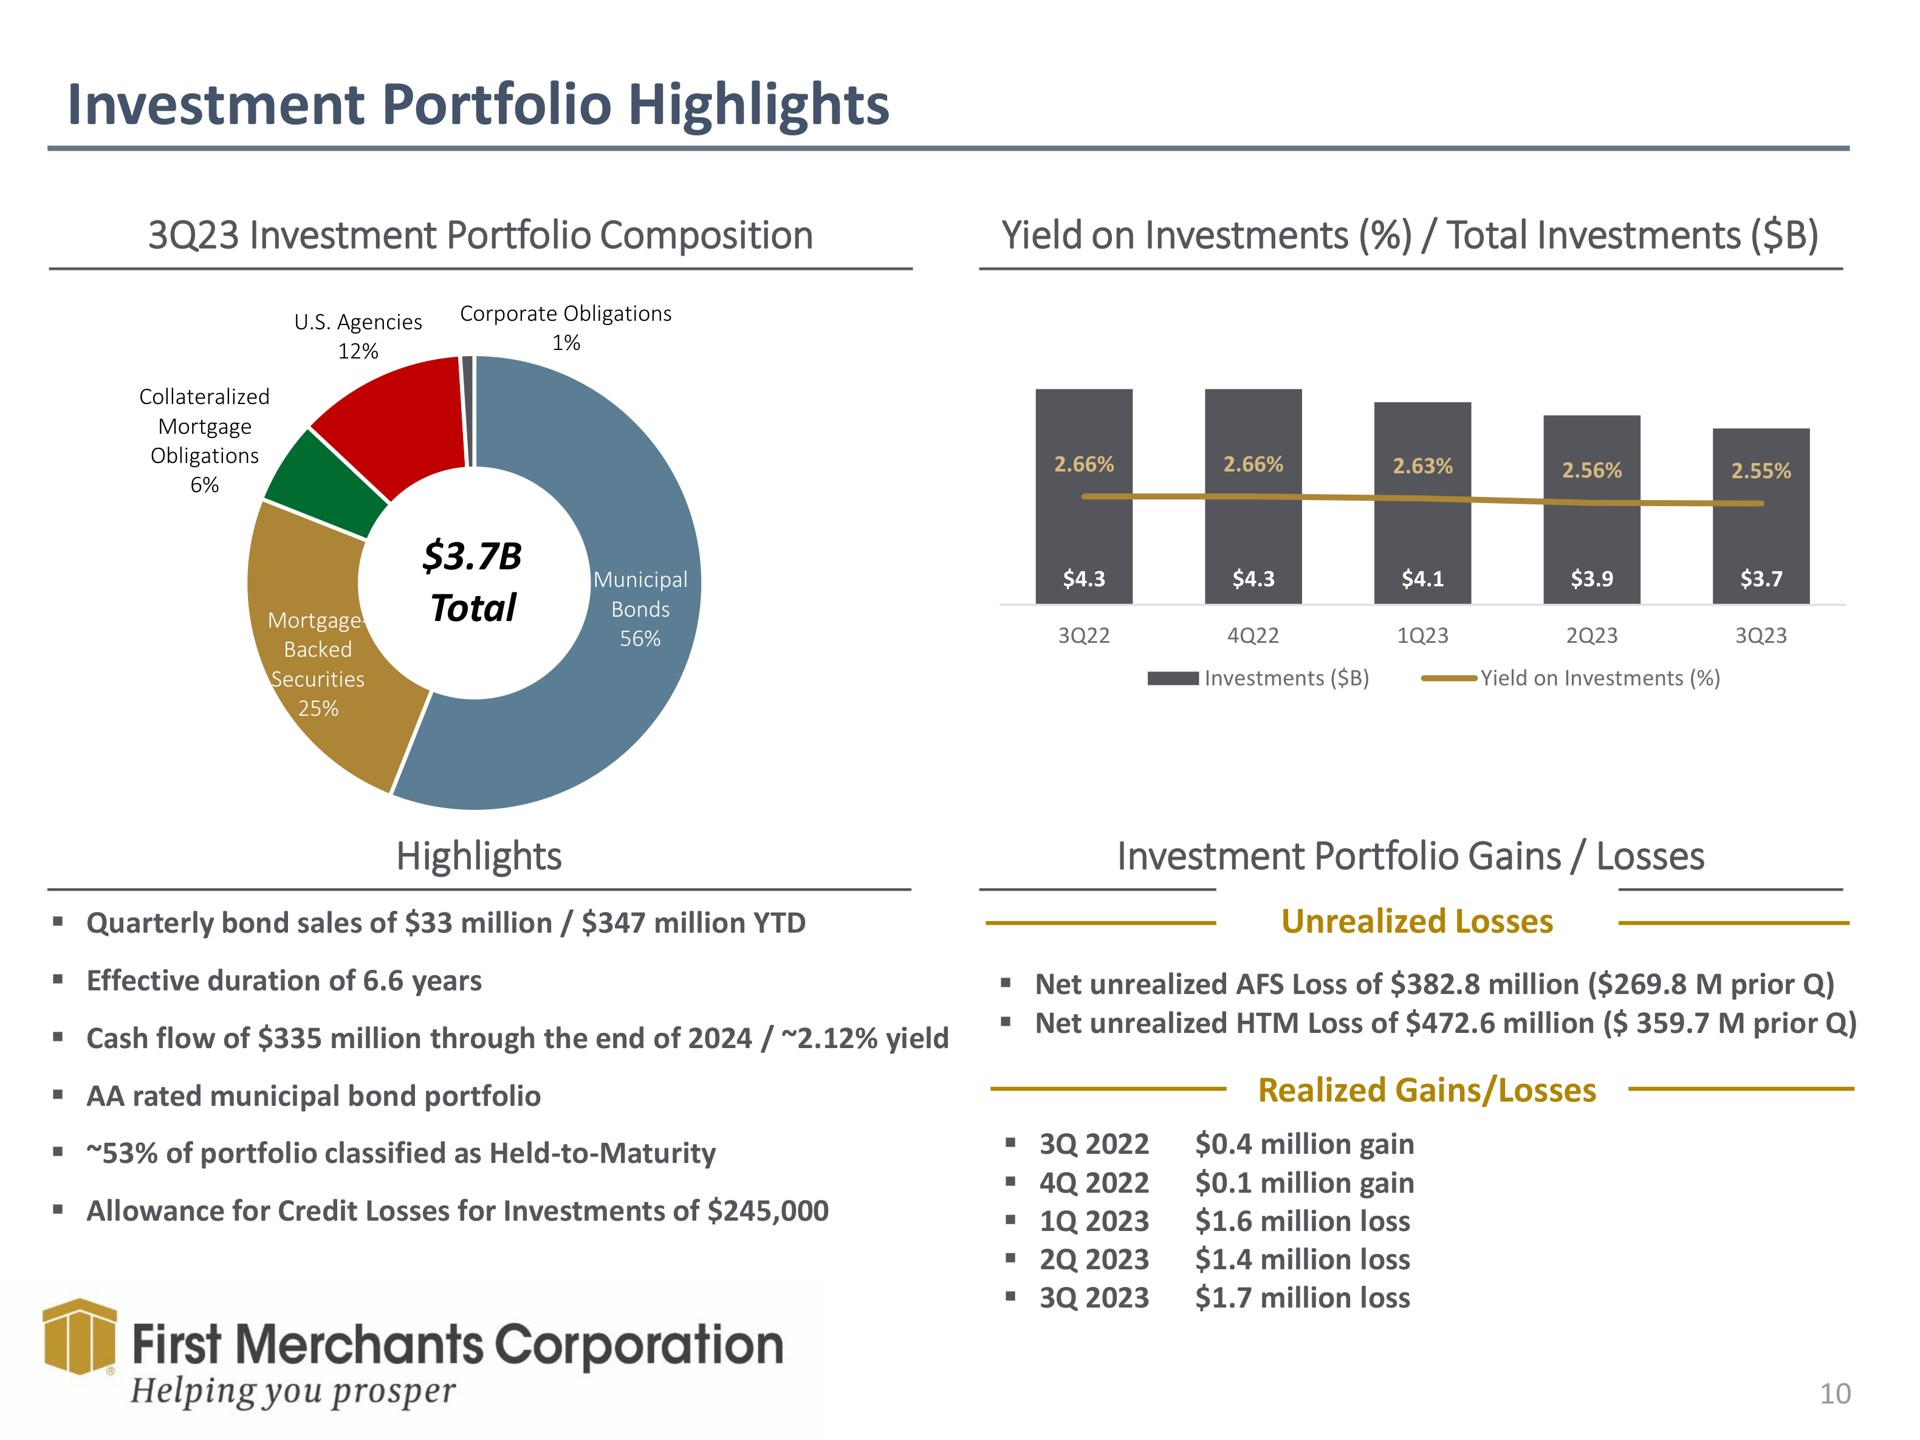 investment portfolio highlights investment portfolio composition yield on investments total investments total highlights investment portfolio gains losses first merchants corporation helping you prosper | First Merchants